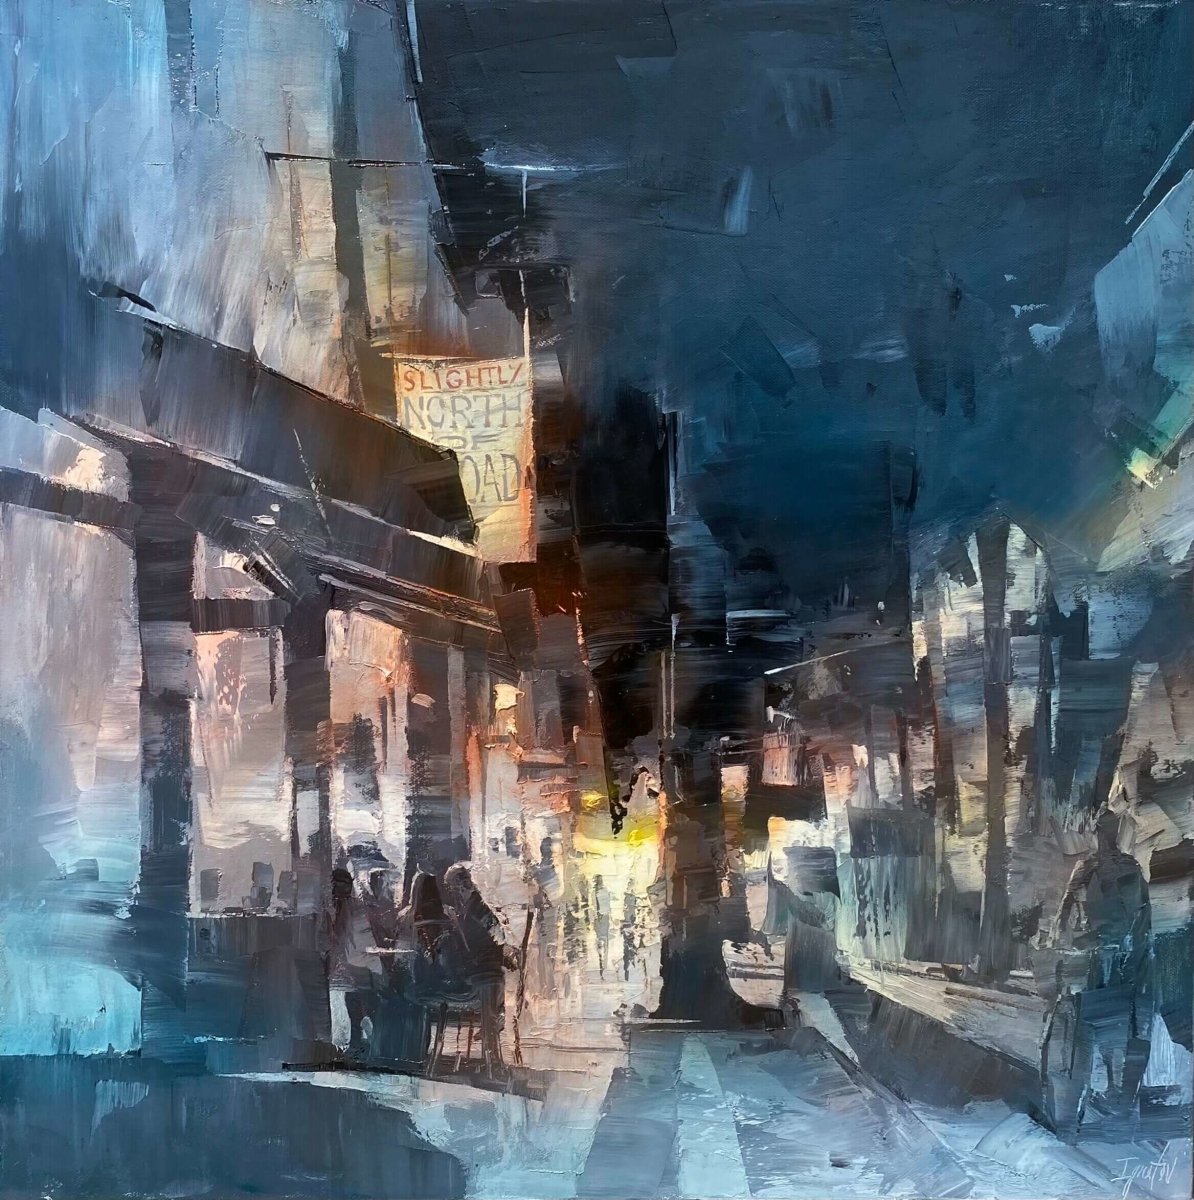 East Bay Nocturne by Ignat Ignatov at LePrince Galleries